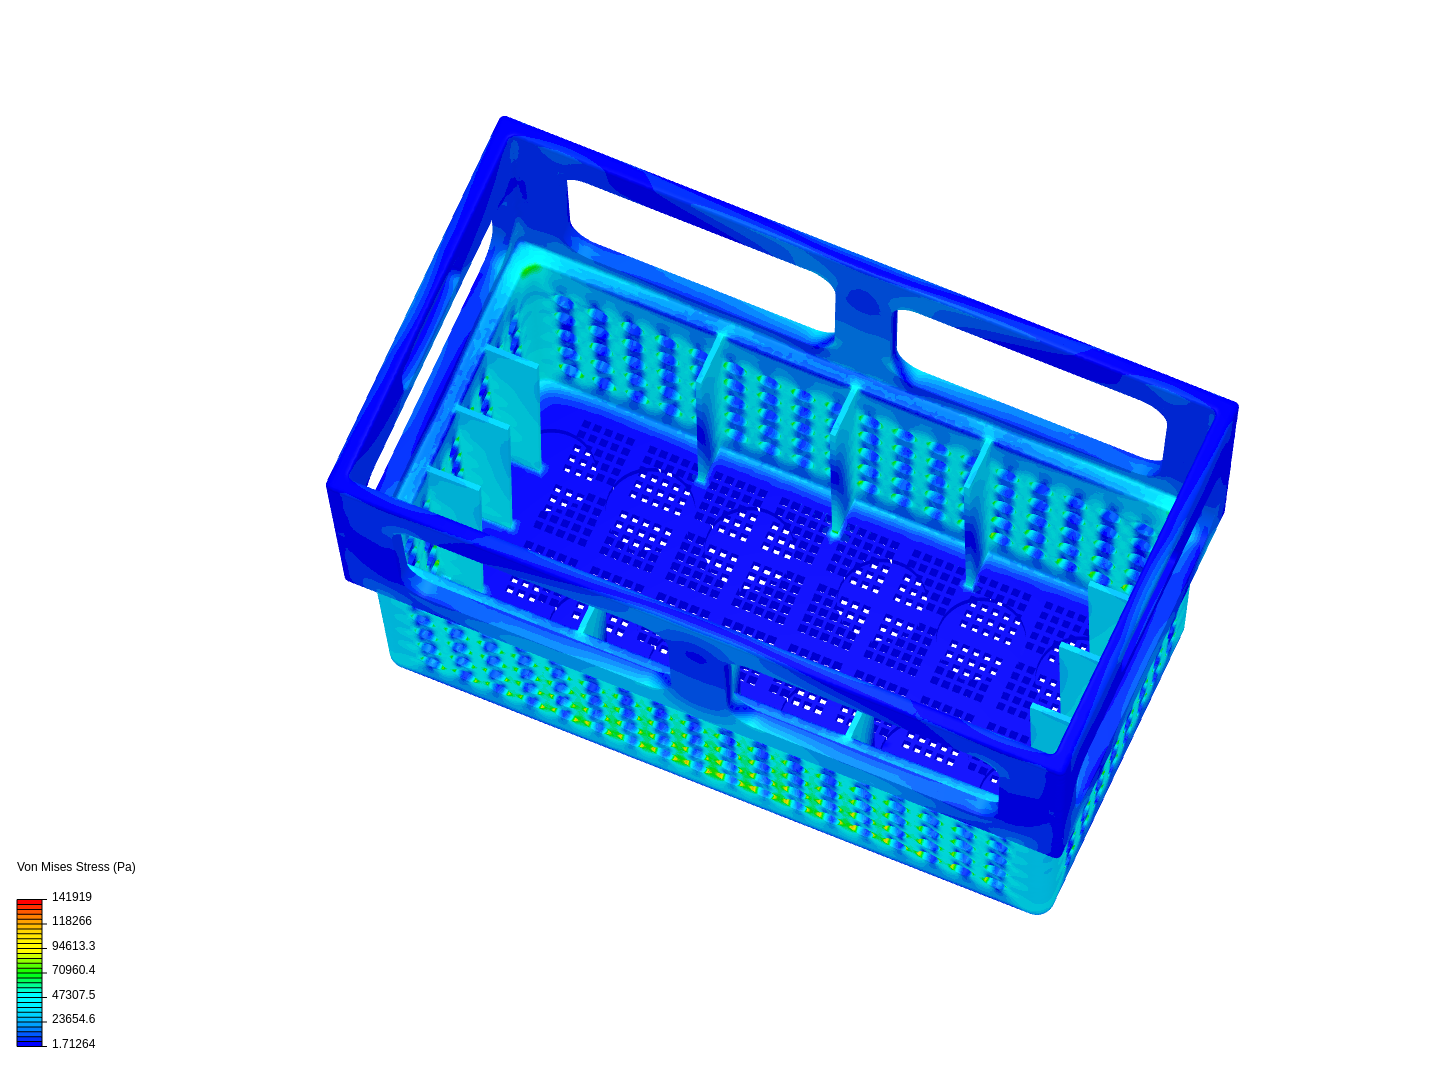 Crate image